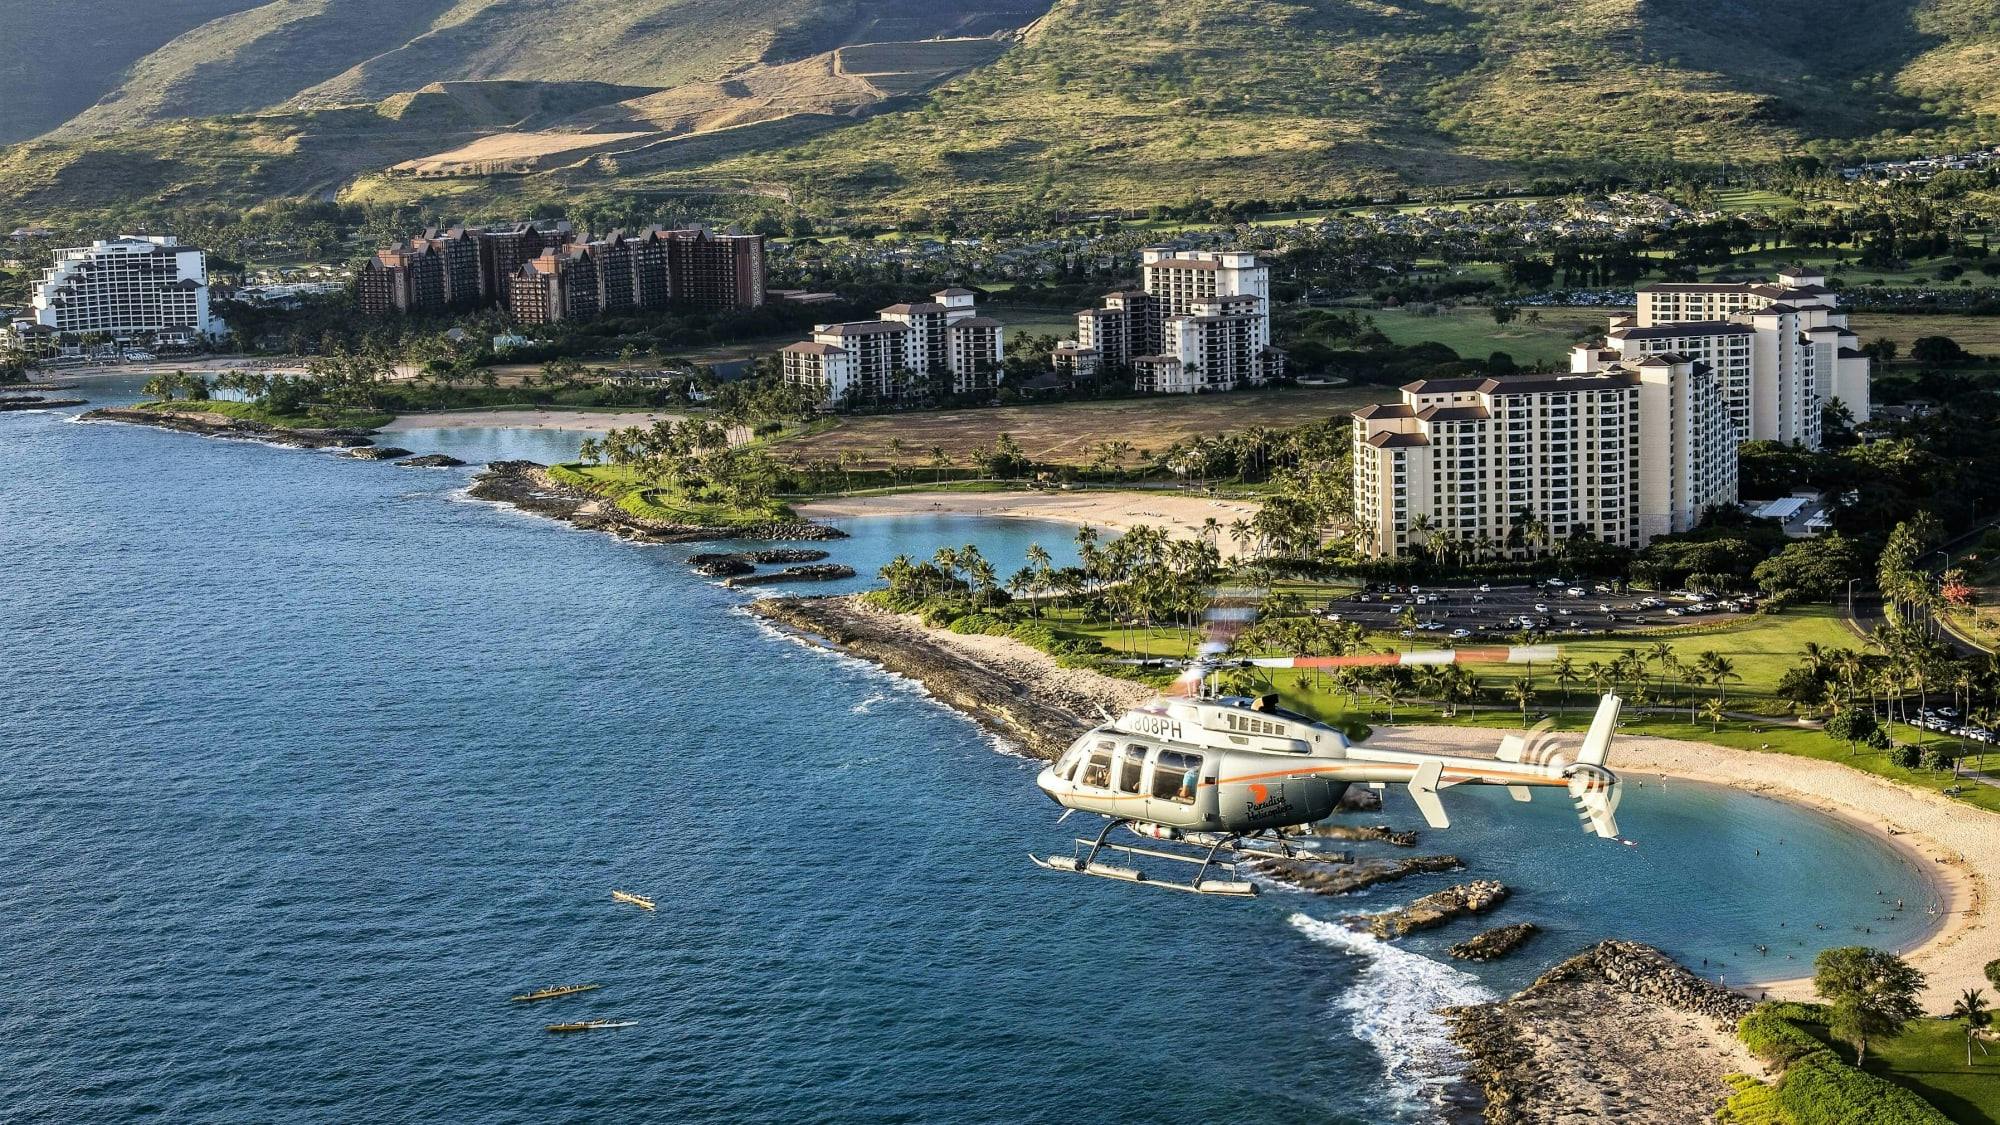 helicopter flying past the oahu coastline with hotels and boats in view